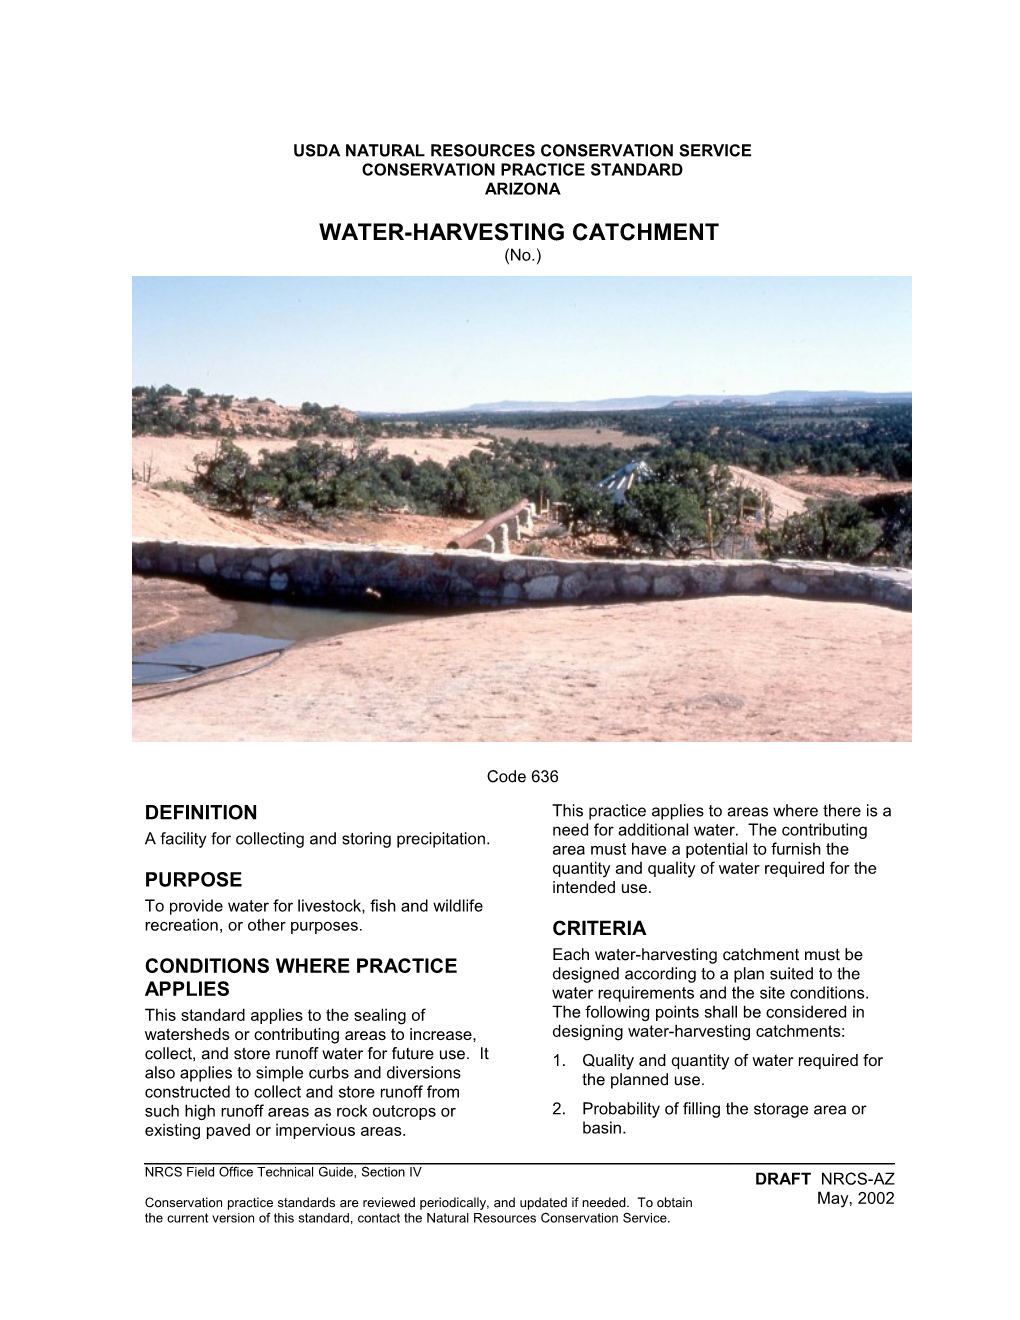 Water-Harvesting Catchment 636